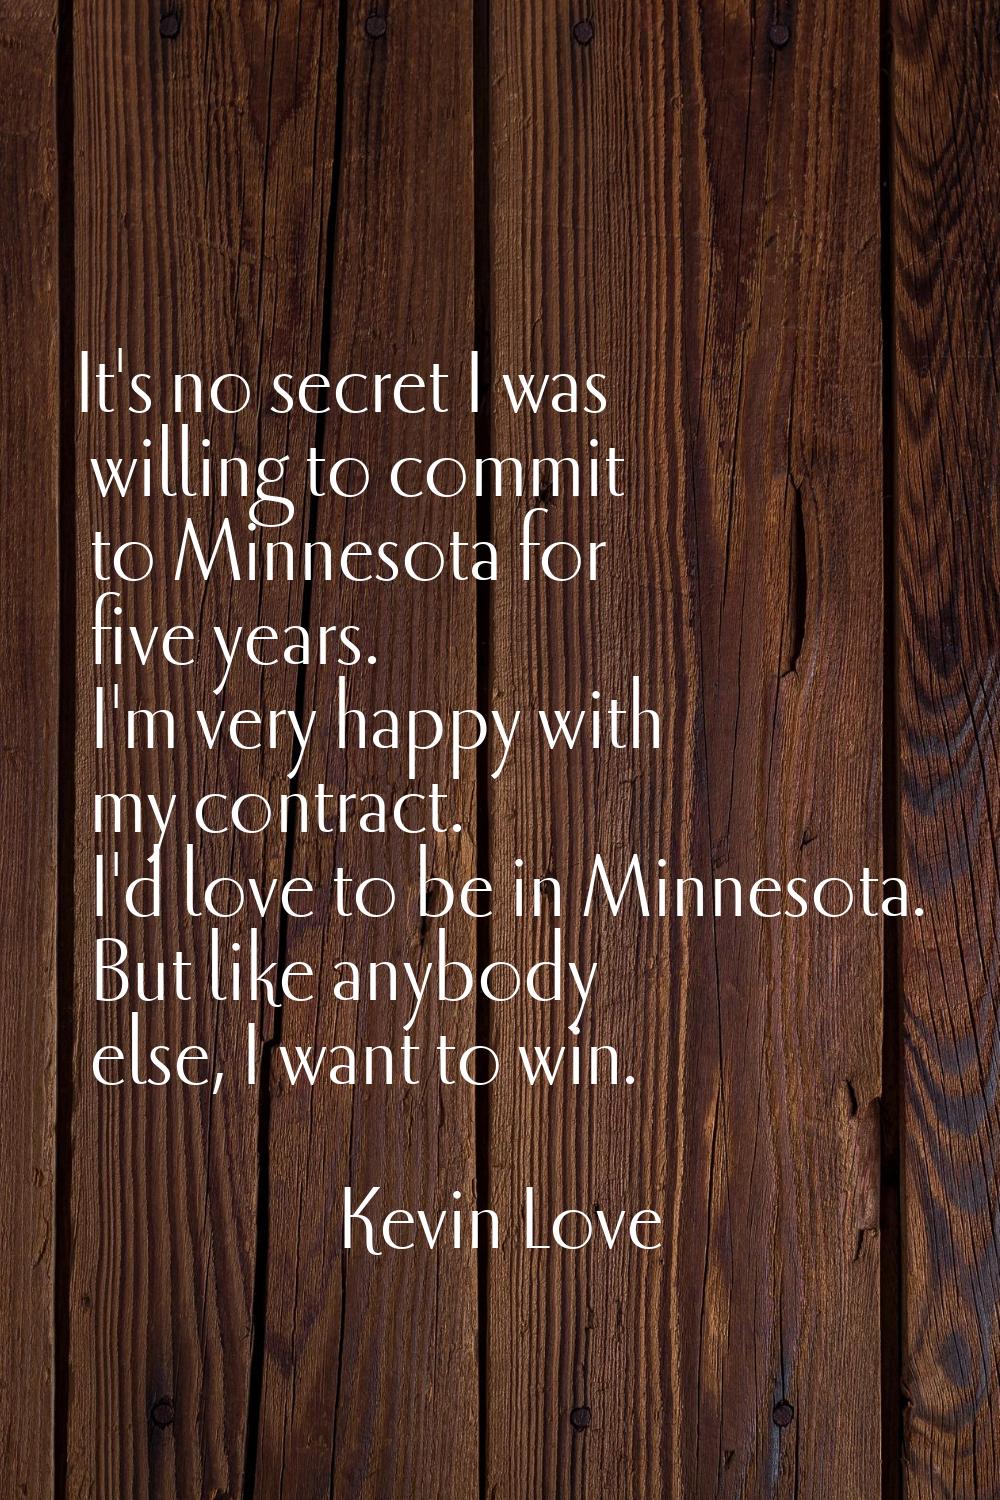 It's no secret I was willing to commit to Minnesota for five years. I'm very happy with my contract